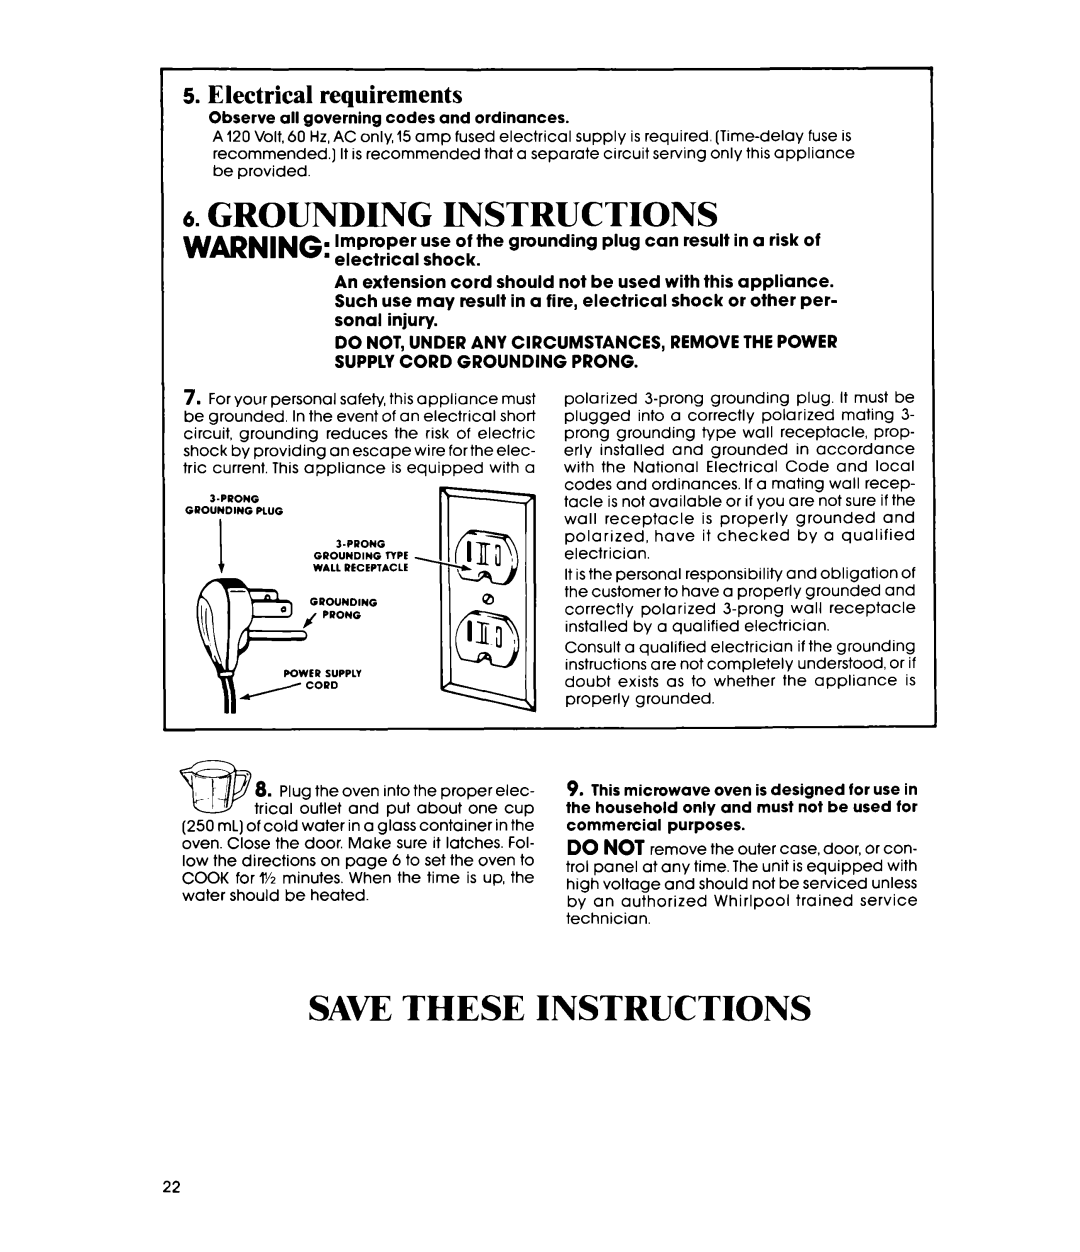 Whirlpool MW8580XP, MW856EXP manual Grounding Instructions, Saw These Instructions, Electrical requirements 